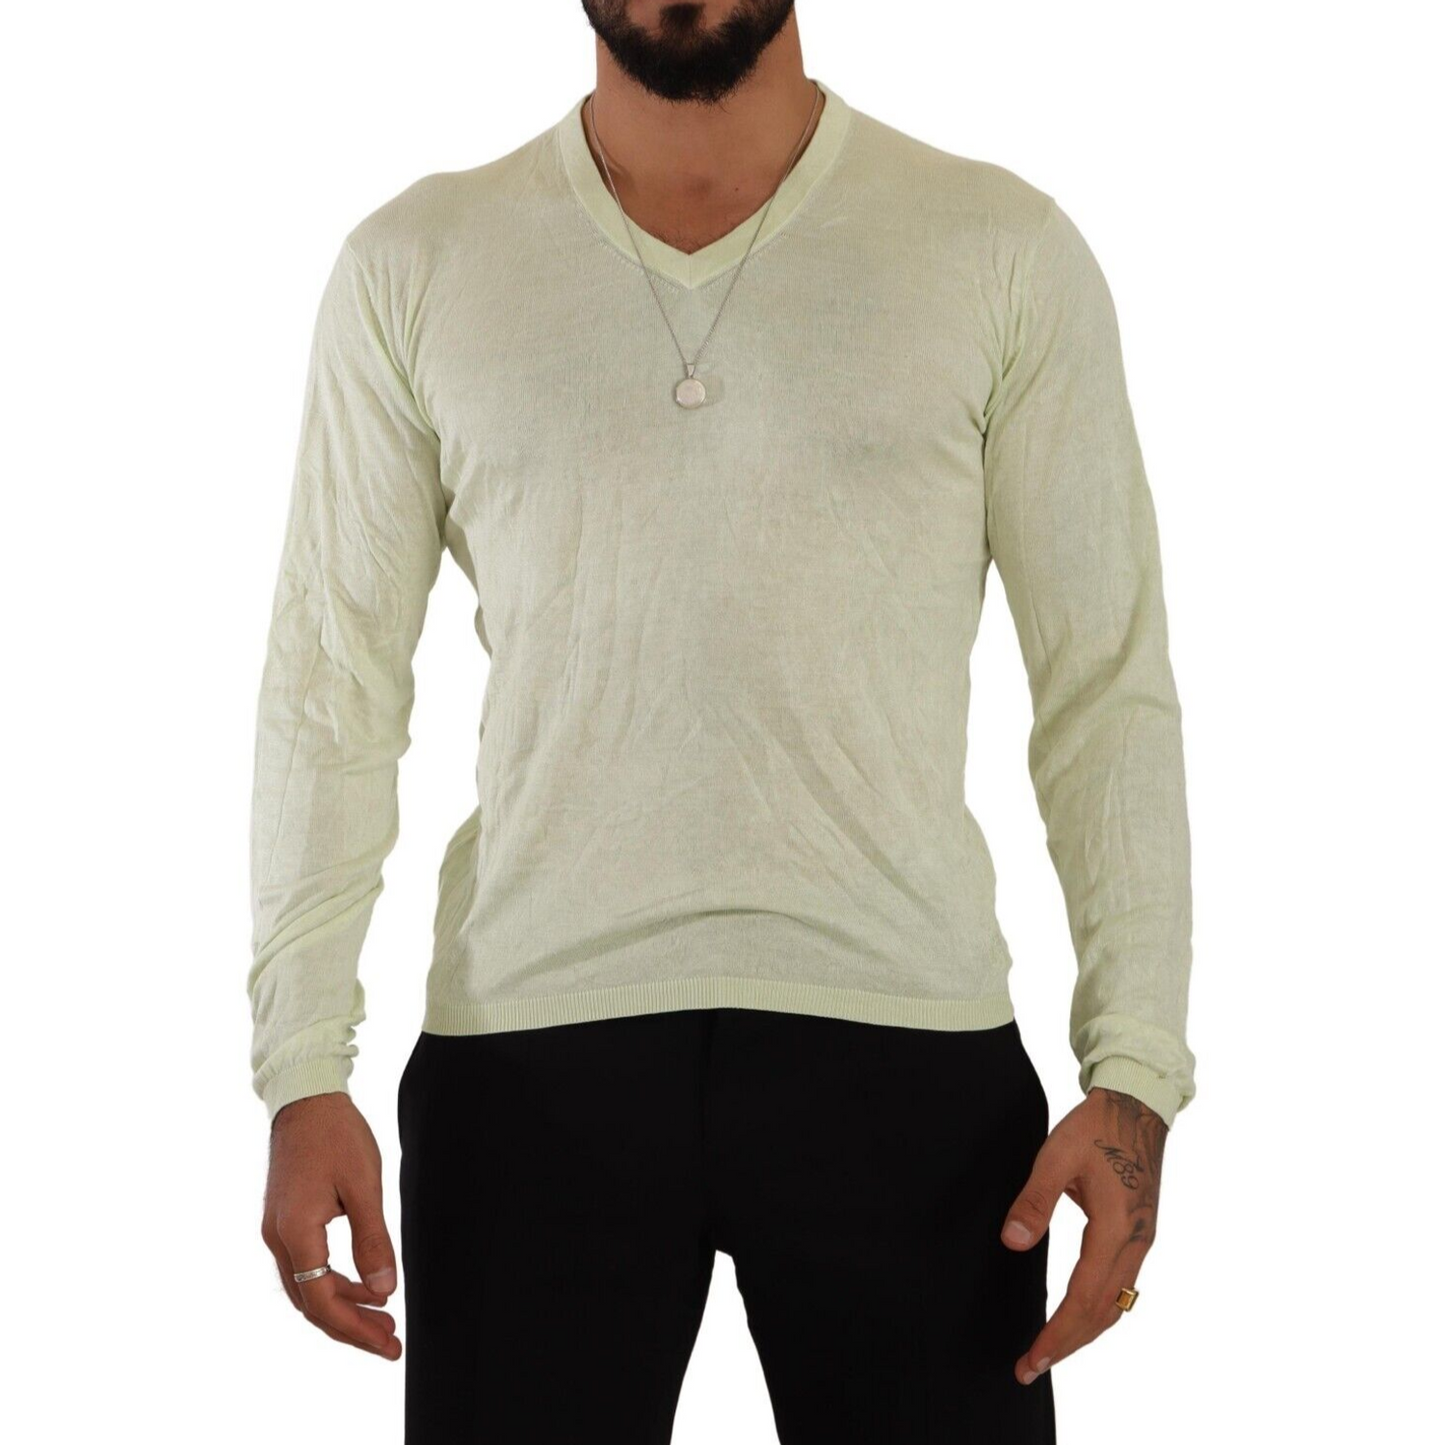 Domenico Tagliente Elegant Silk V-Neck Pullover Sweater yellow-v-neck-long-sleeves-pullover-sweater s-l1600-93-a2dcc82c-363.png